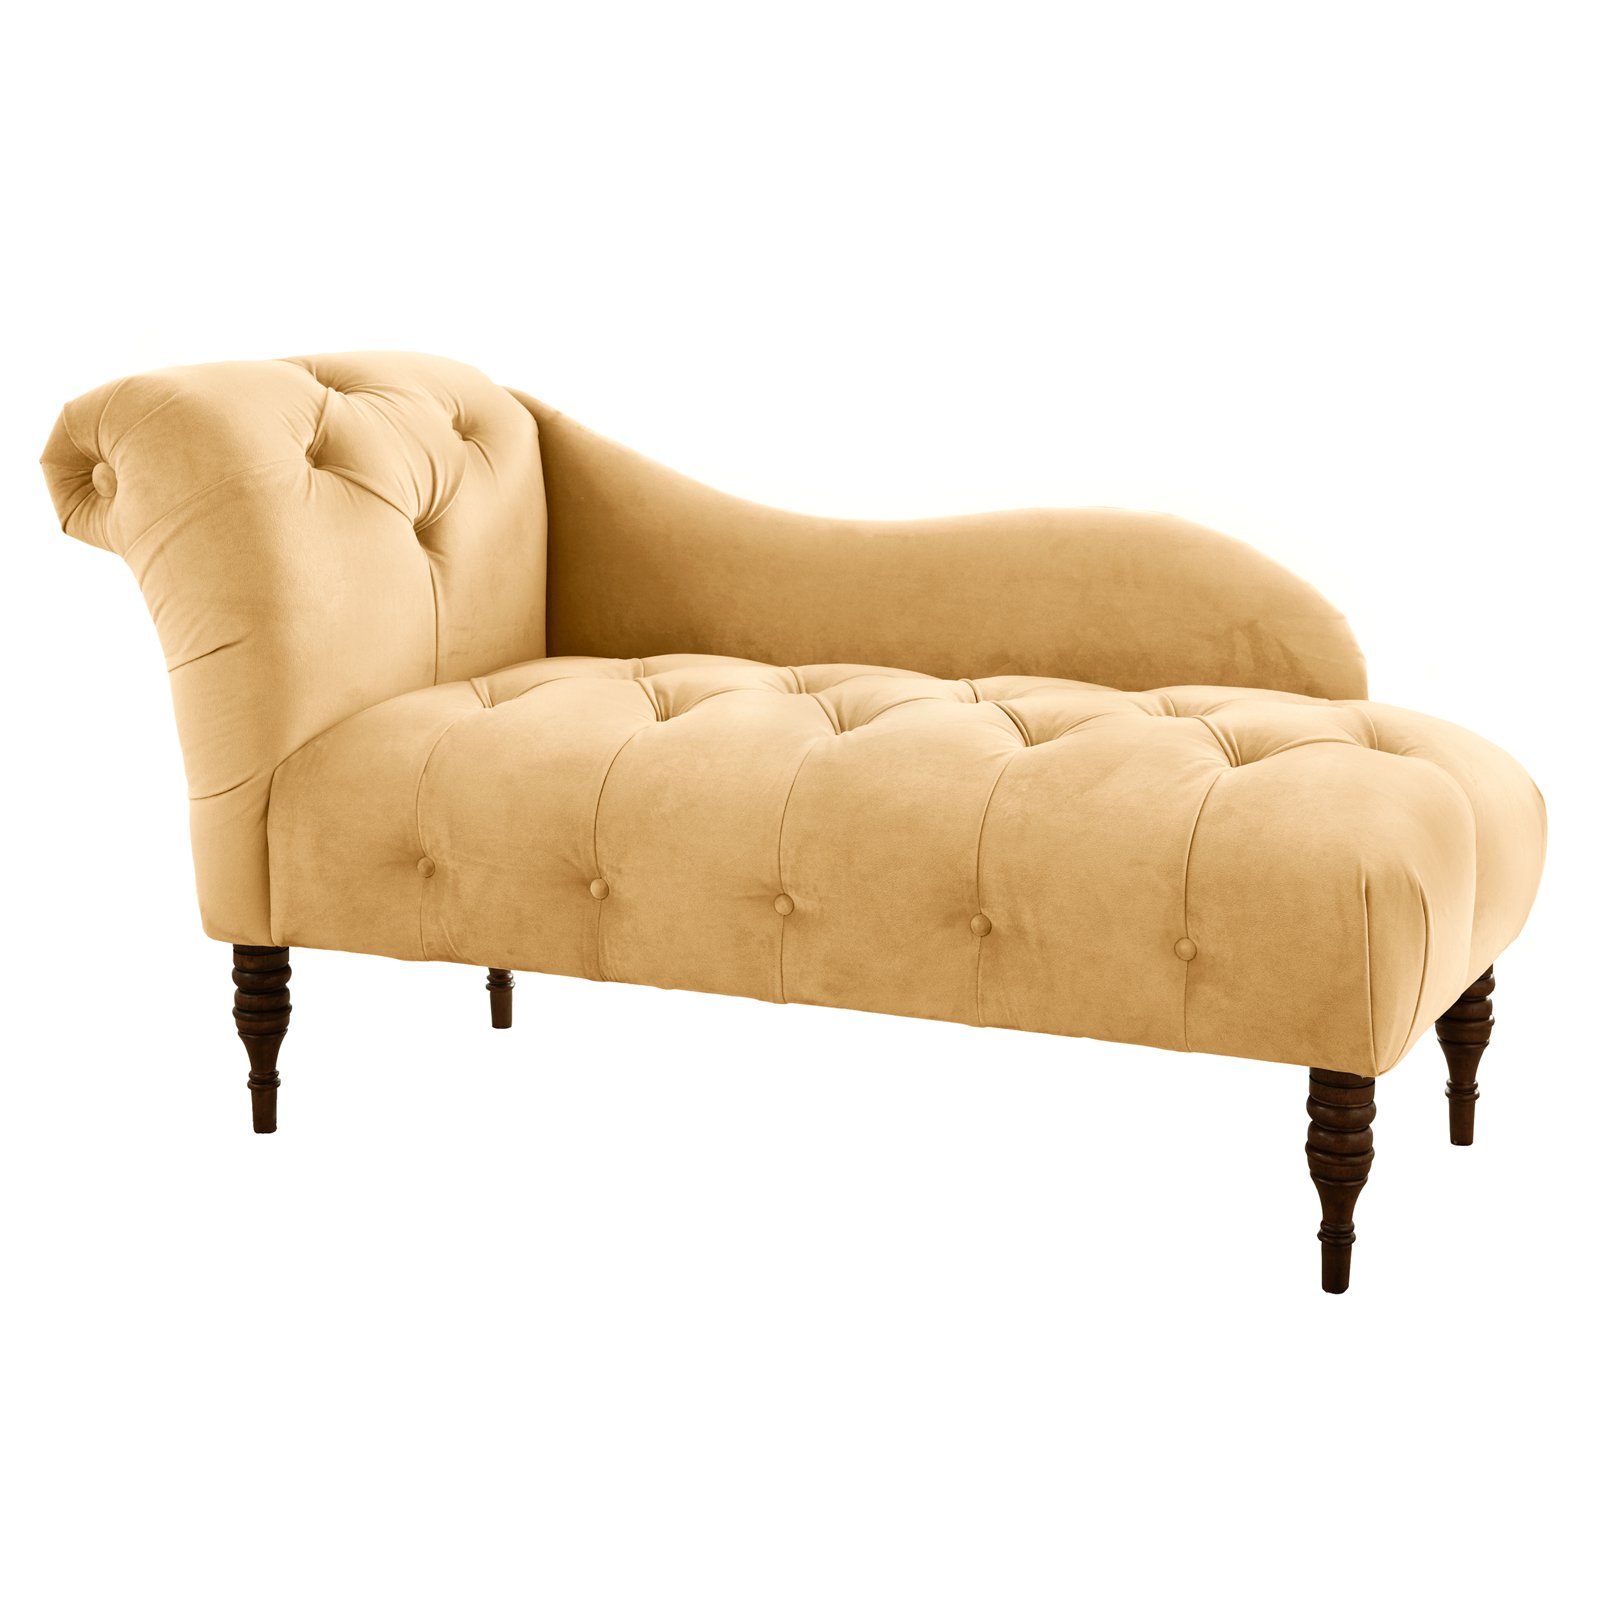 madison tufted chaise lounge - indoor chaise lounges at hayneedle WAWPZHE